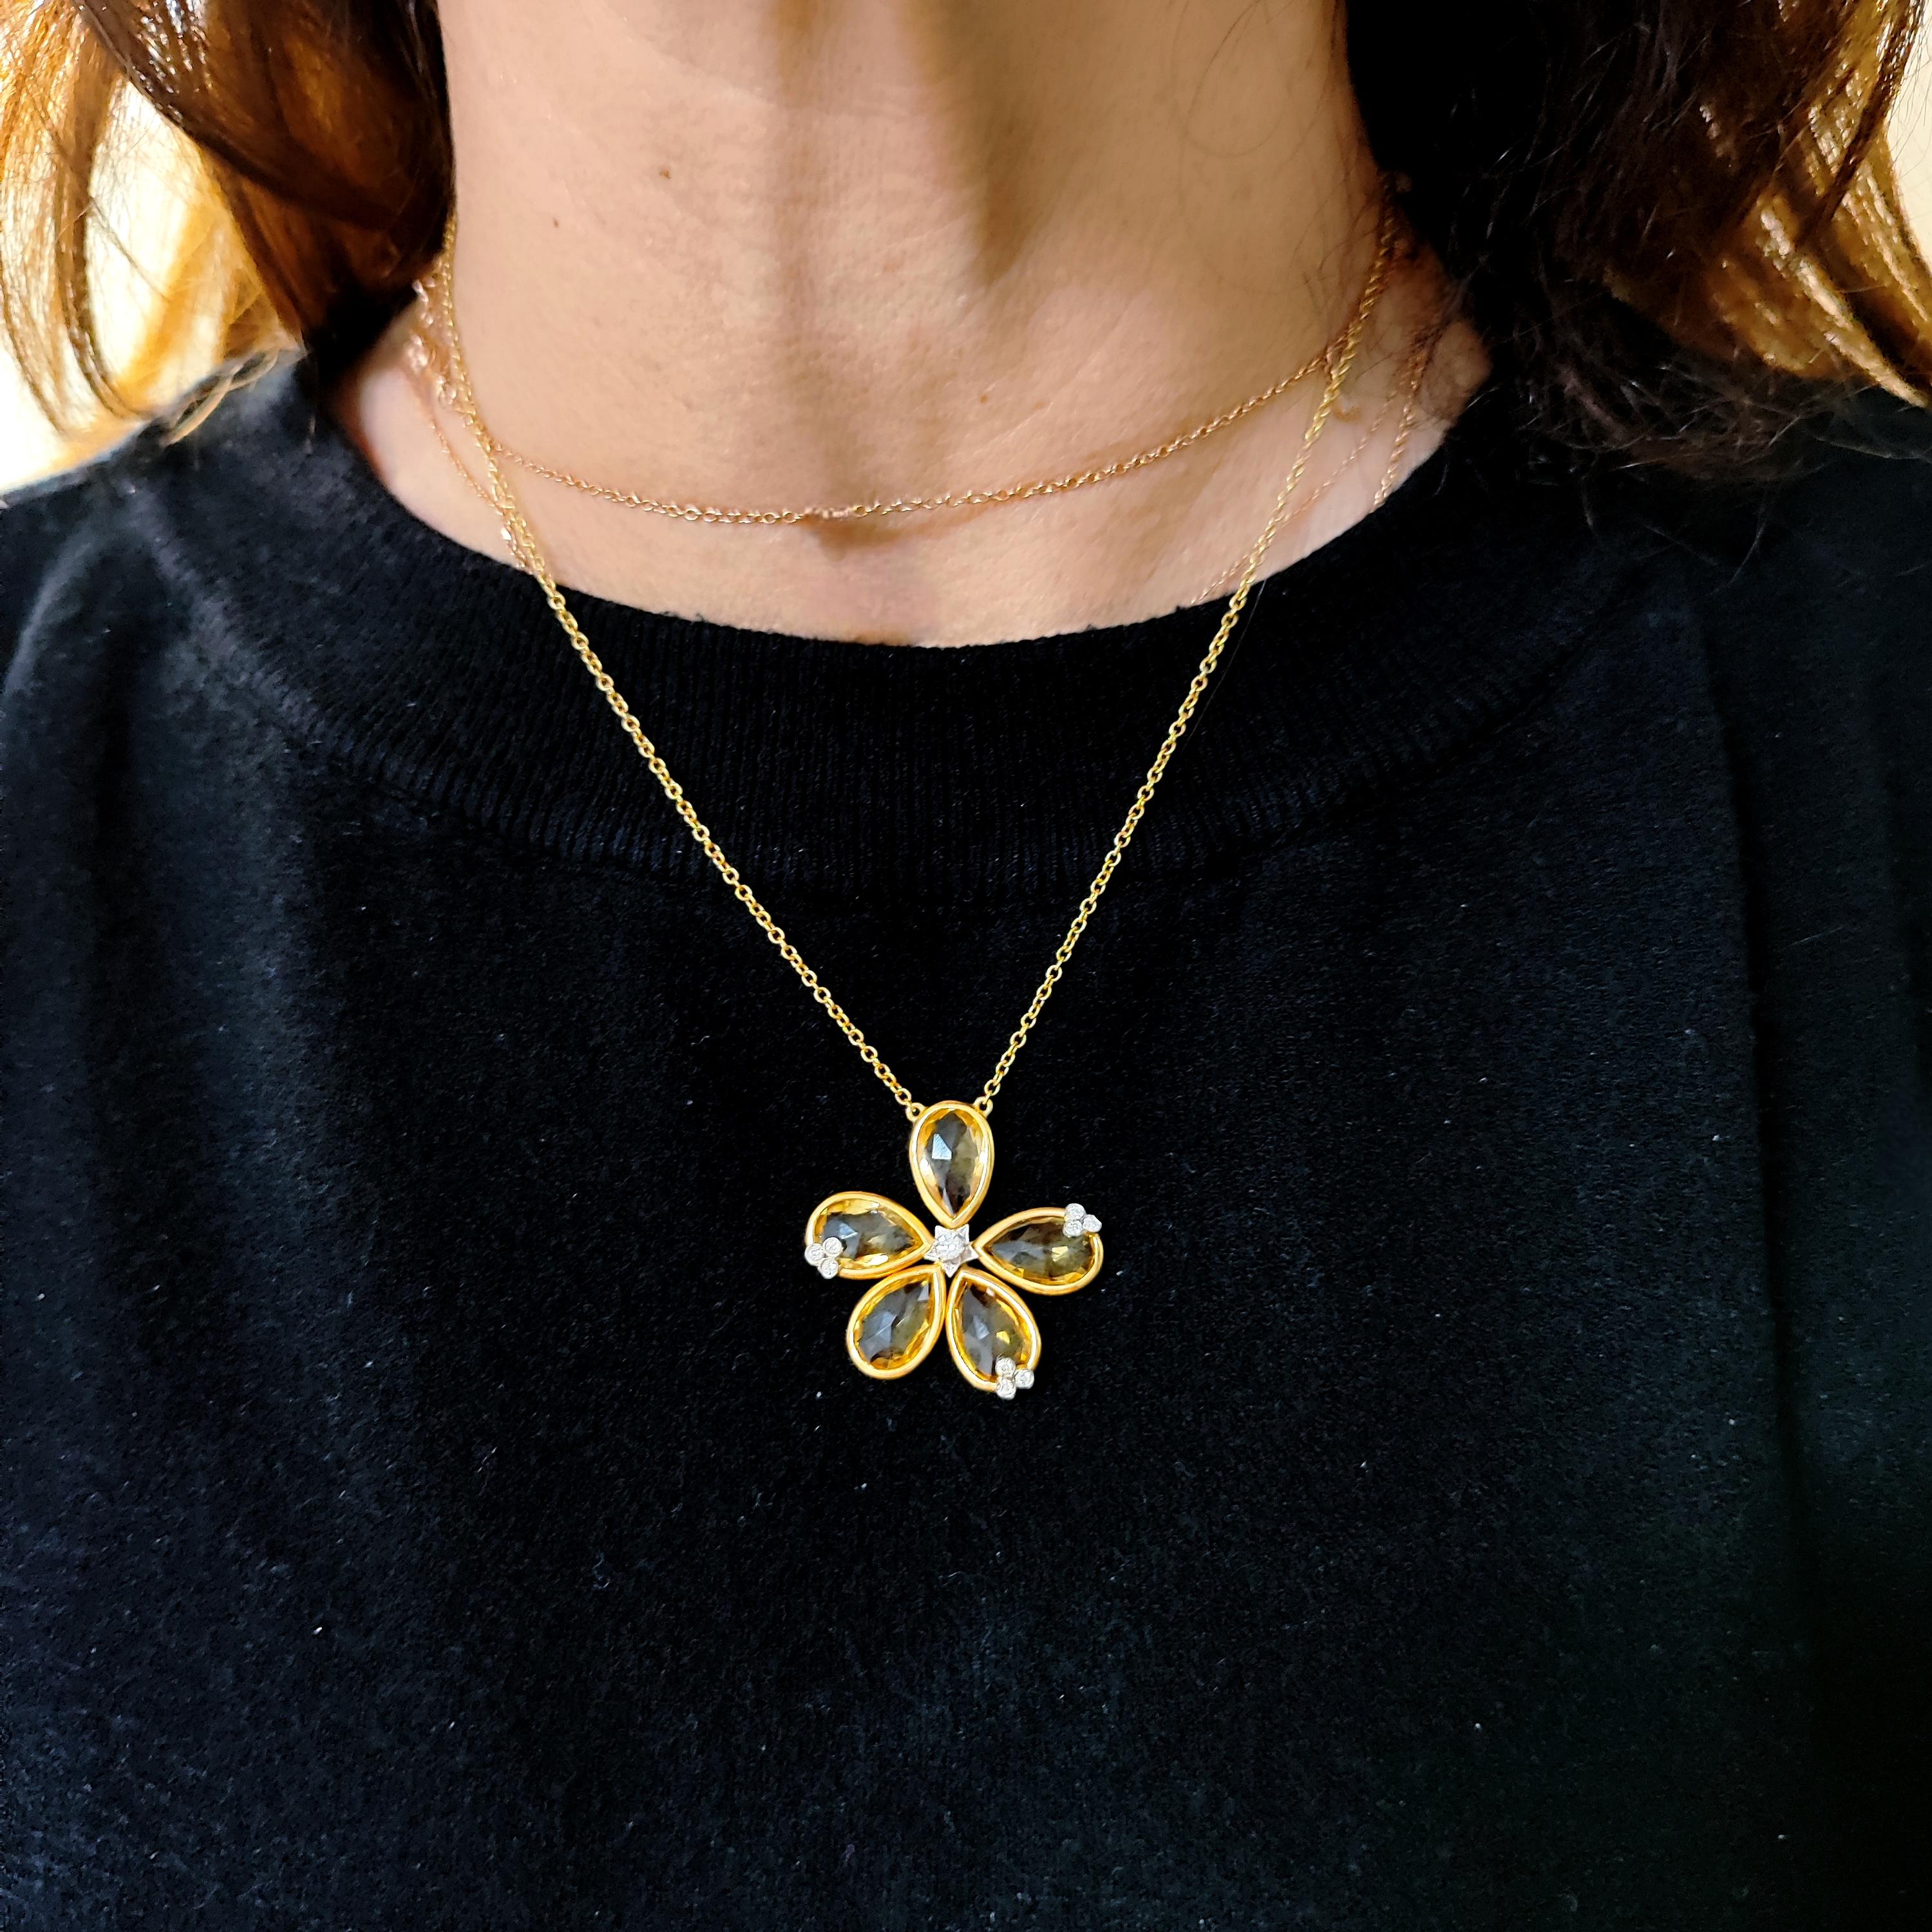 Brilliant Cut 18kt Yellow Gold necklace with flower pendant in Citrine quartz and diamonds For Sale